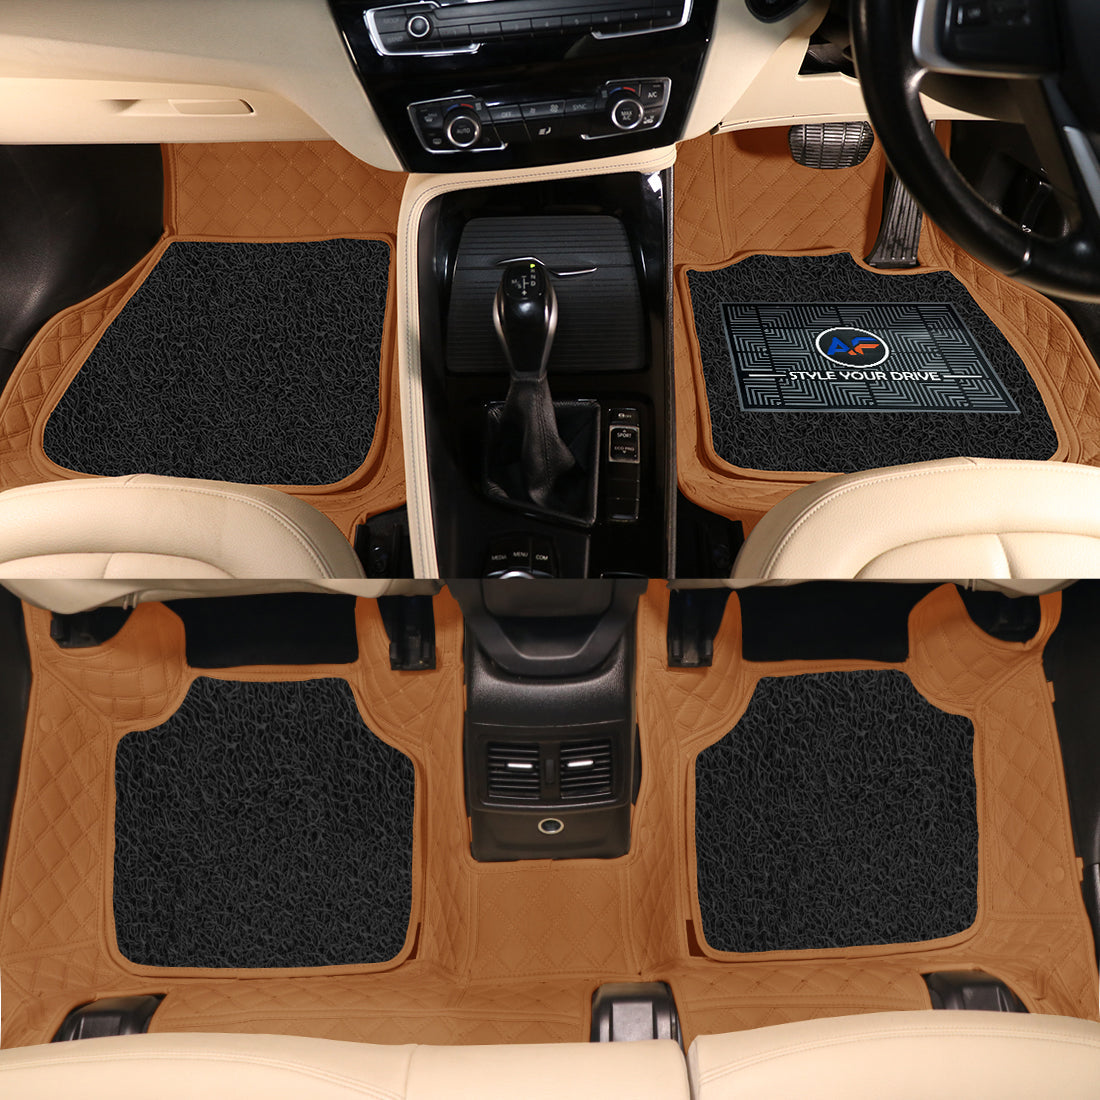 Volvo XC90 2016 7D Luxury Car Mat, All Weather Proof, Anti-Skid, 100% Waterproof & Odorless with Unique Diamond Fish Design (24mm Luxury PU Leather, 2 Rows)